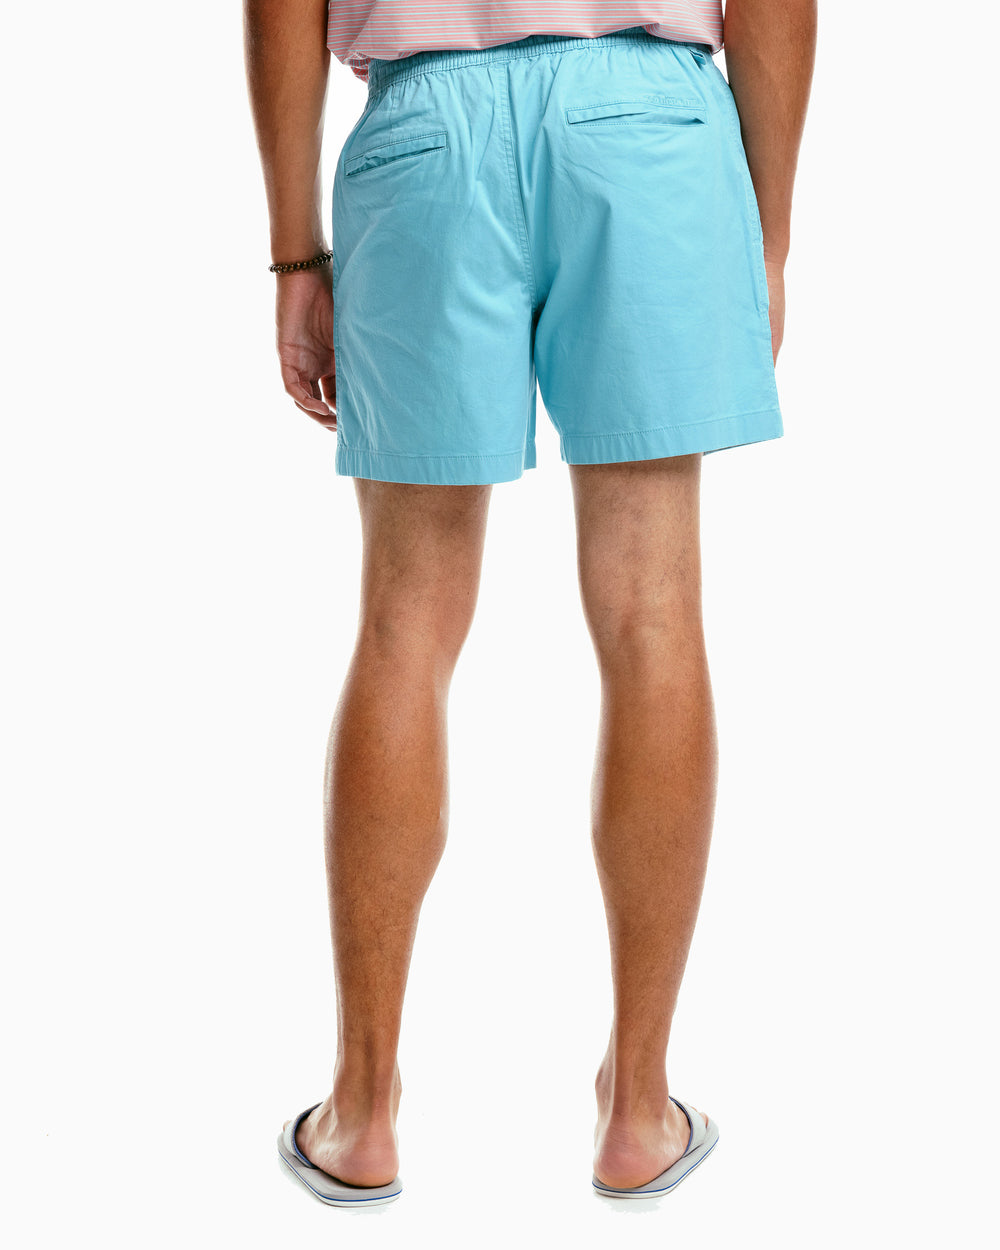 The model back view of the Sun Farer 6 inch short - Ocean Teal